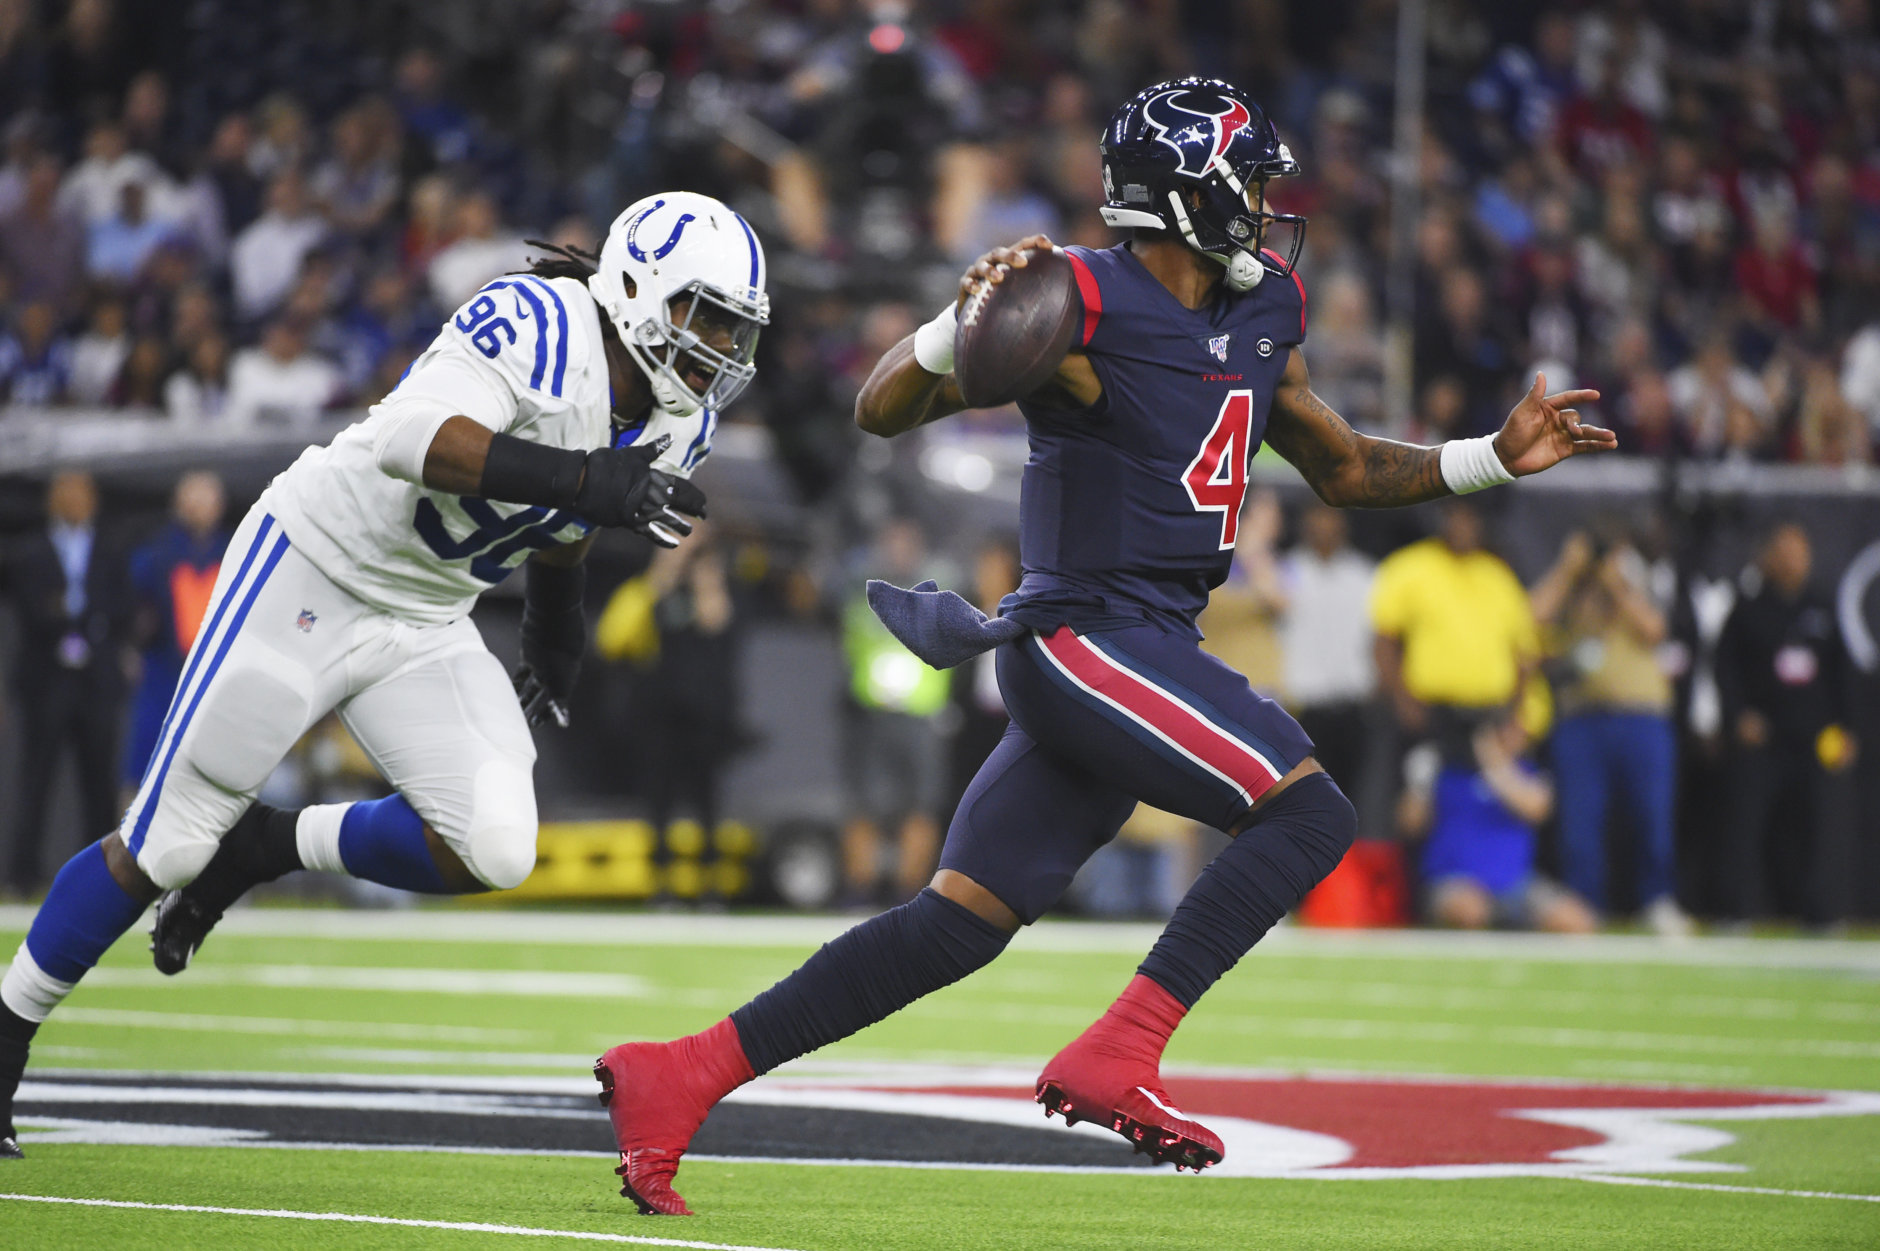 <p><b><i>Colts 17</i></b><br />
<b><i>Texans 20</i></b></p>
<p>In a game that gives Houston the inside track to the AFC South title, the Texans <a href="https://twitter.com/NFL_Memes/status/1197672801731317761?s=20" target="_blank" rel="noopener">showed up like Mortal Kombat</a> and got a <a href="https://profootballtalk.nbcsports.com/2019/11/22/late-fumble-should-have-triggered-a-formal-replay-review/" target="_blank" rel="noopener">far-from-flawless victory</a> that had fans in Indianapolis throwing down their proverbial controllers and wishing for a reset button.</p>
